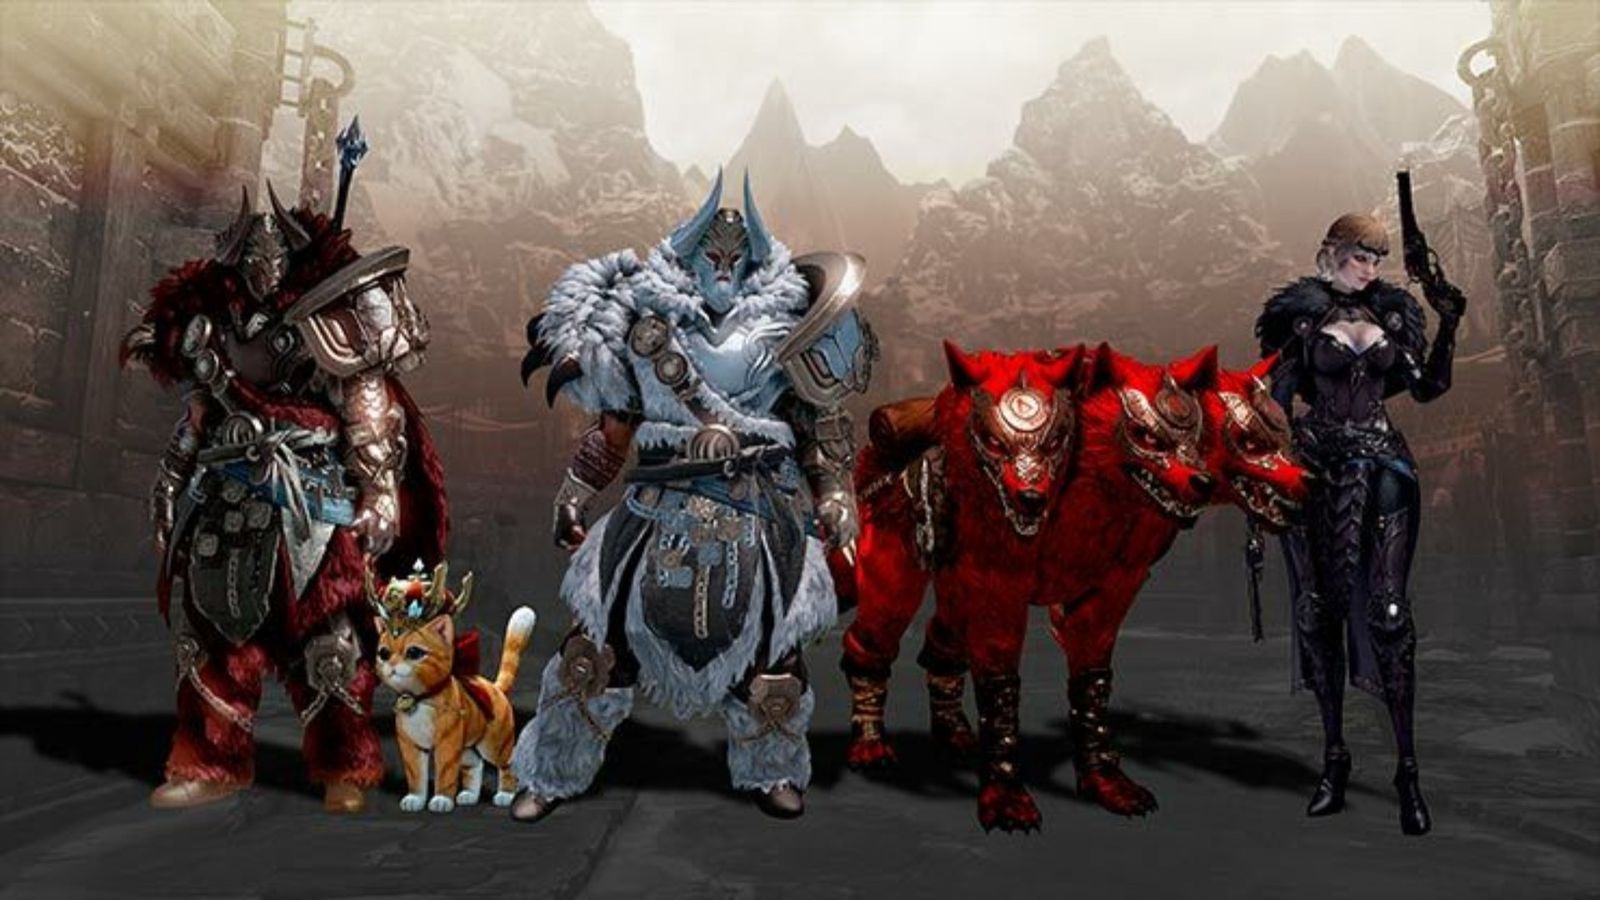 Three characters of different classes in Lost Ark, alongside a mount and a pet that is available in Founder's Packs.